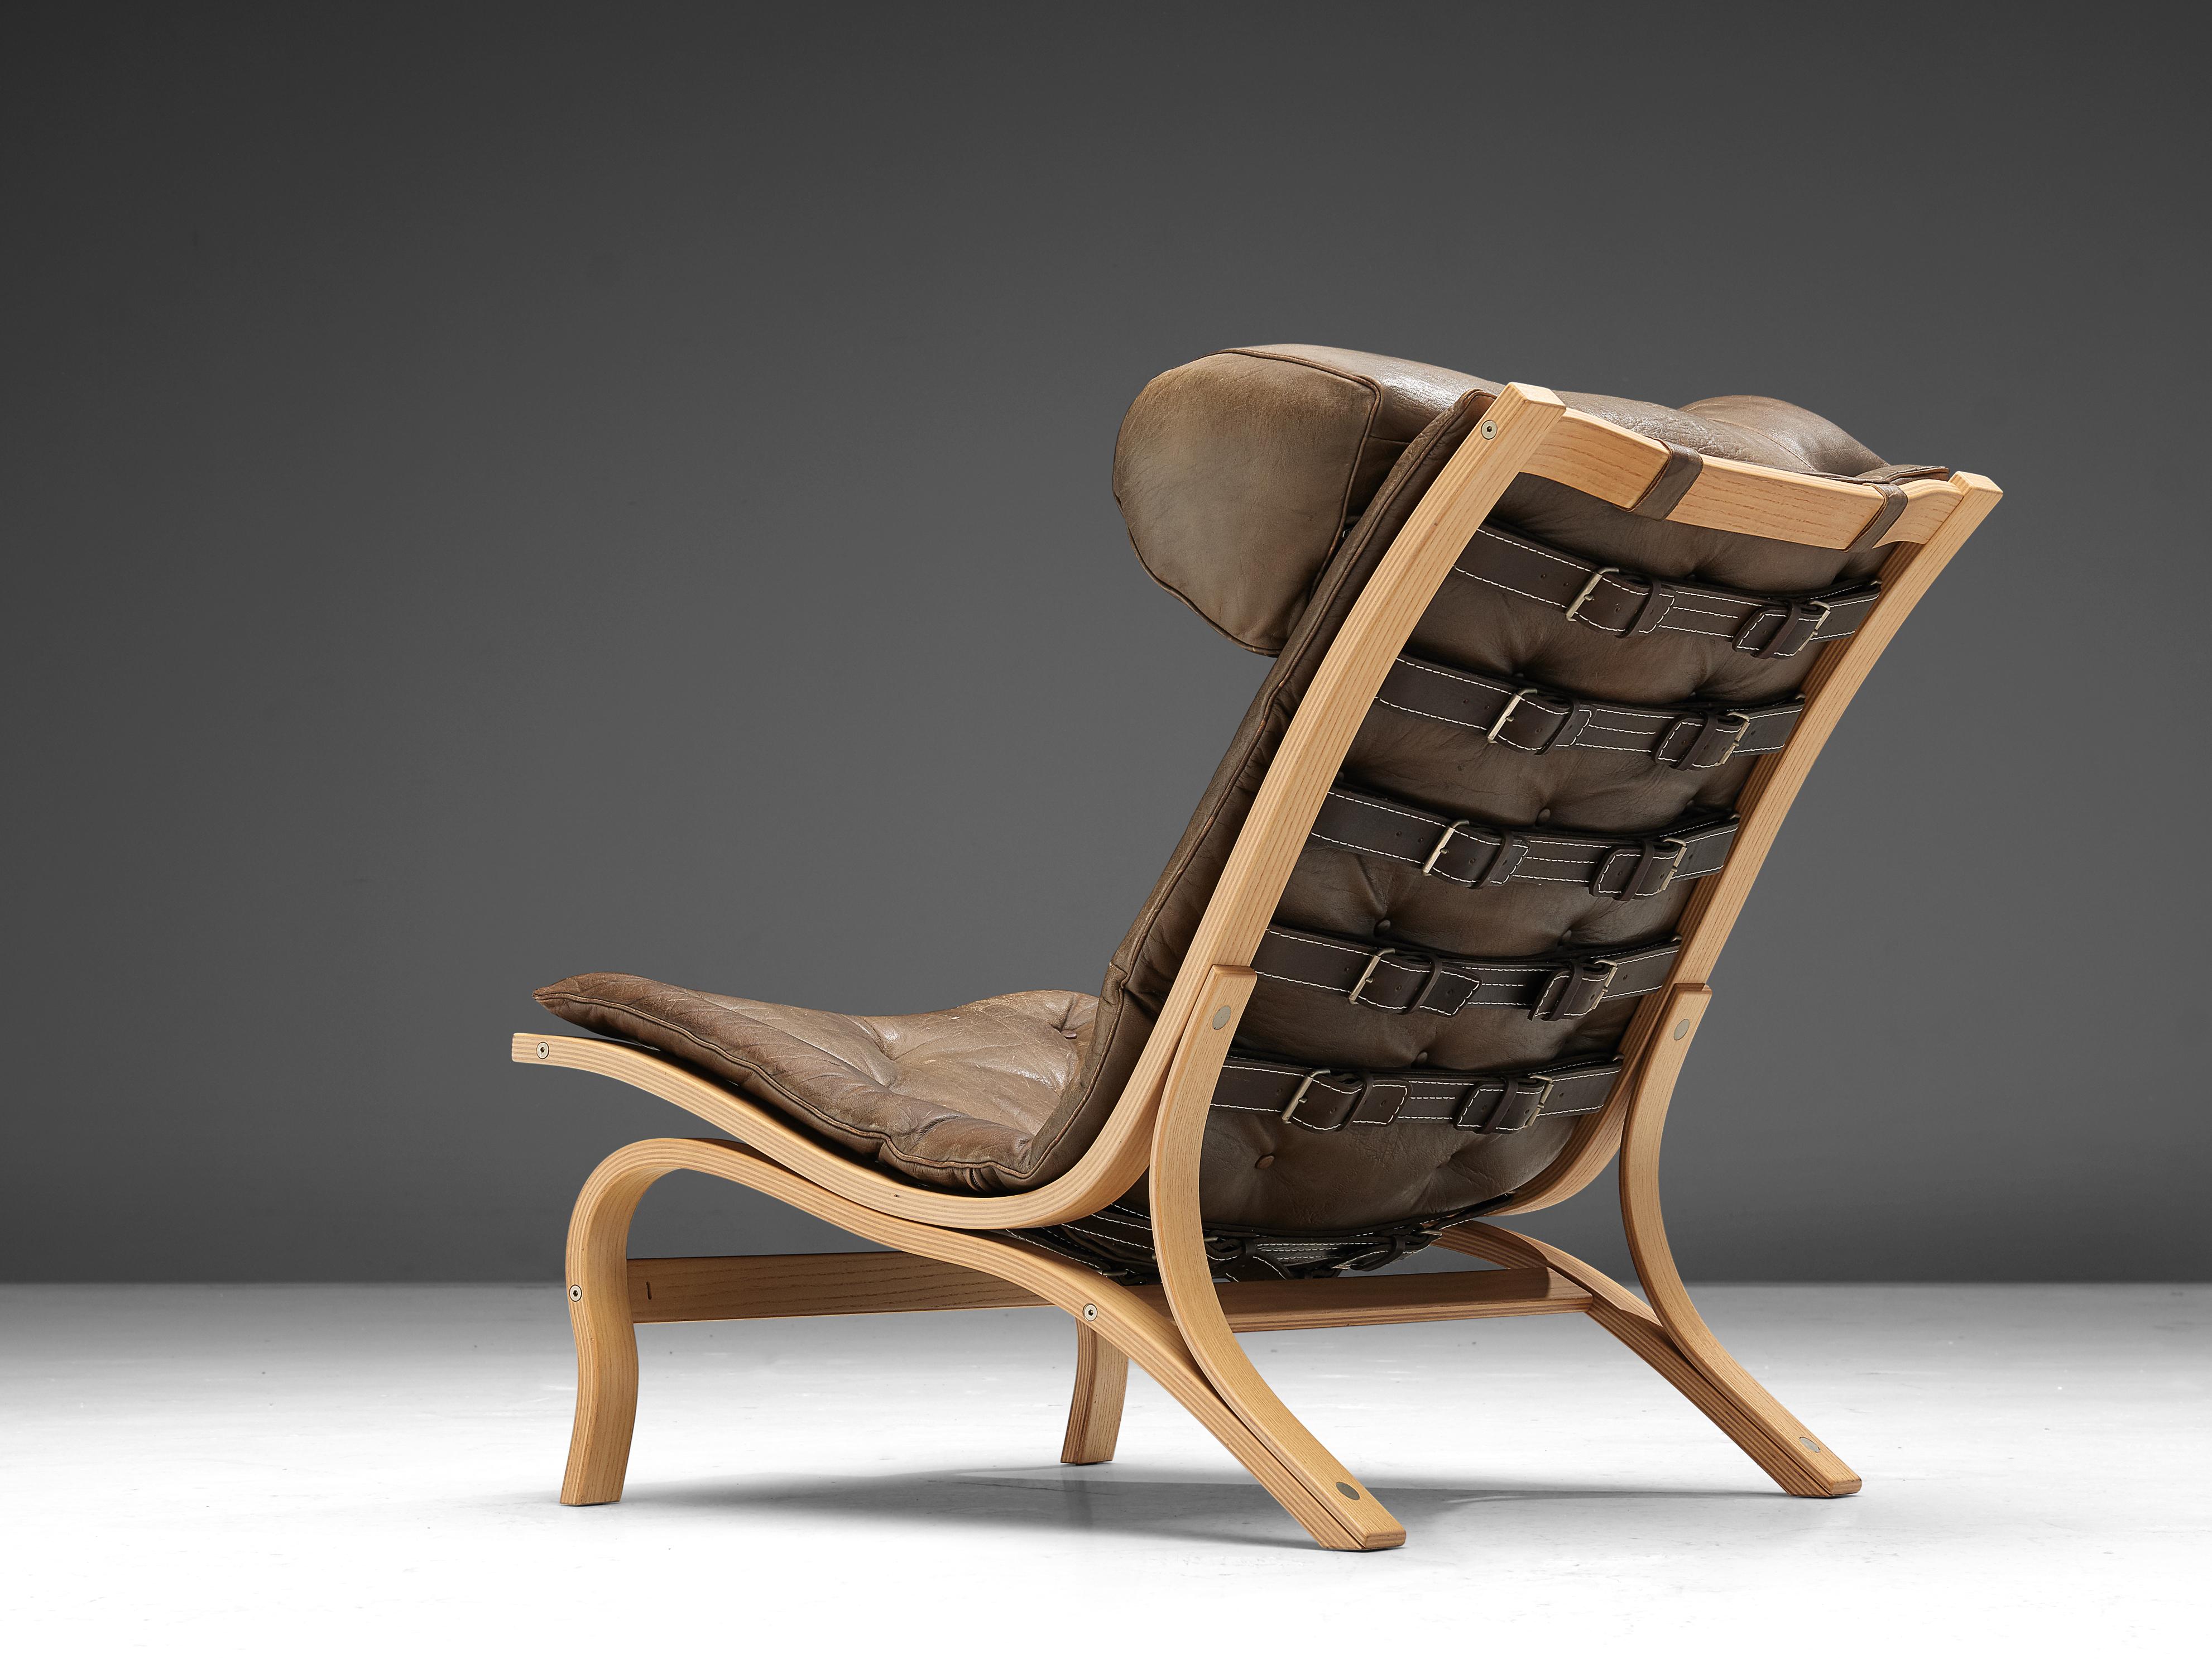 Arne Norell for Norell Møbel AB, 'Skandi' lounge chair, brown leather, wooden frame, Denmark, 1960

This 'Skandi' lounge chair is designed by Arne Norell and reminds of the well-known 'Ari' design. The whole frame is executed in ashwood, and the